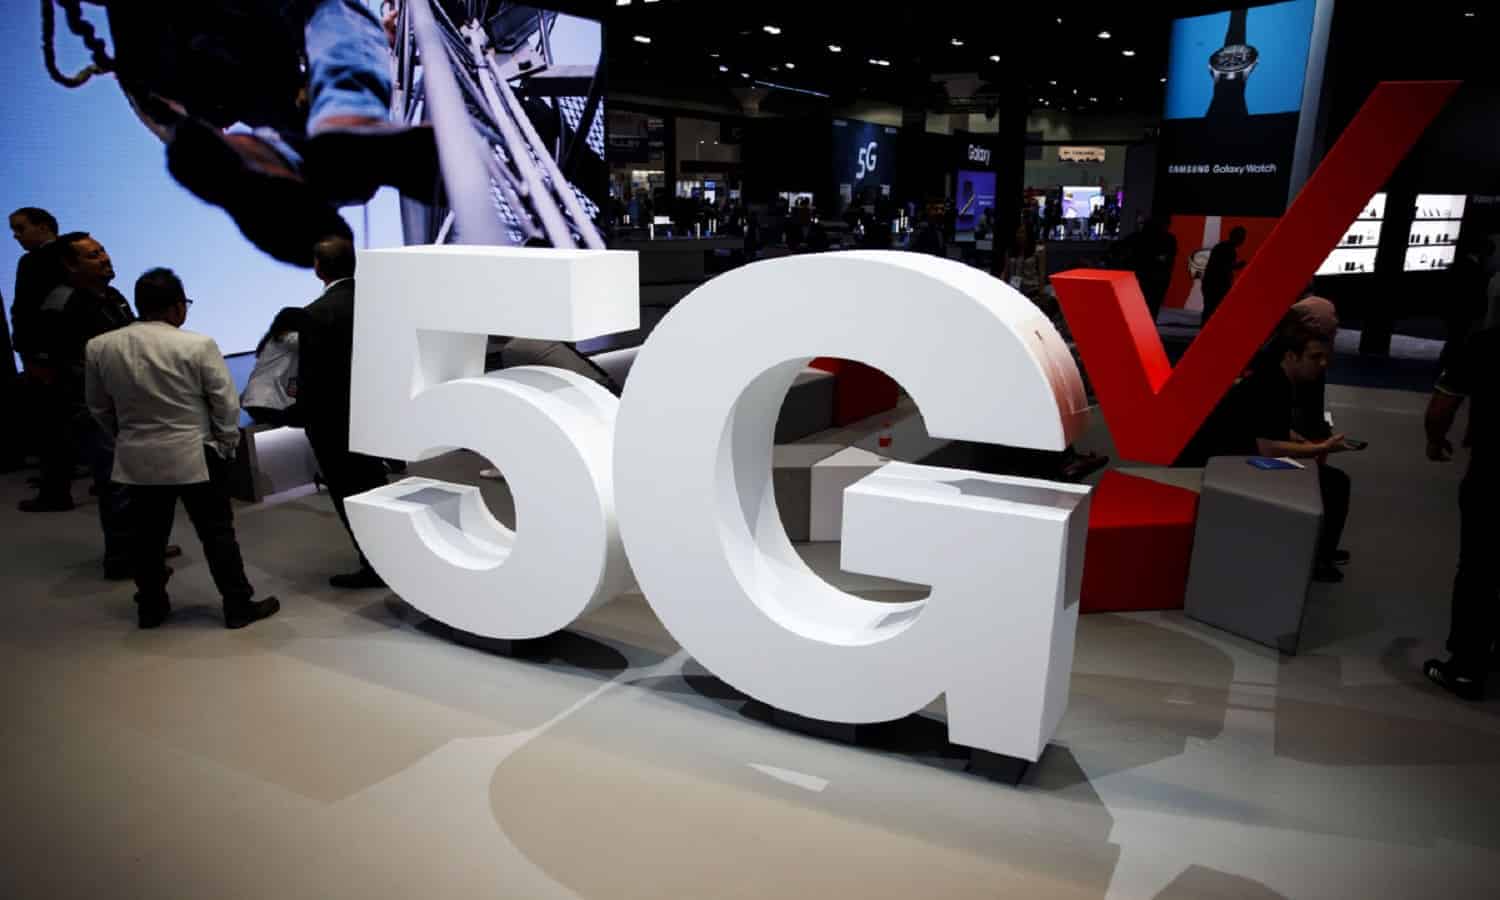 Egypt plans to issue 5G network licenses in December

